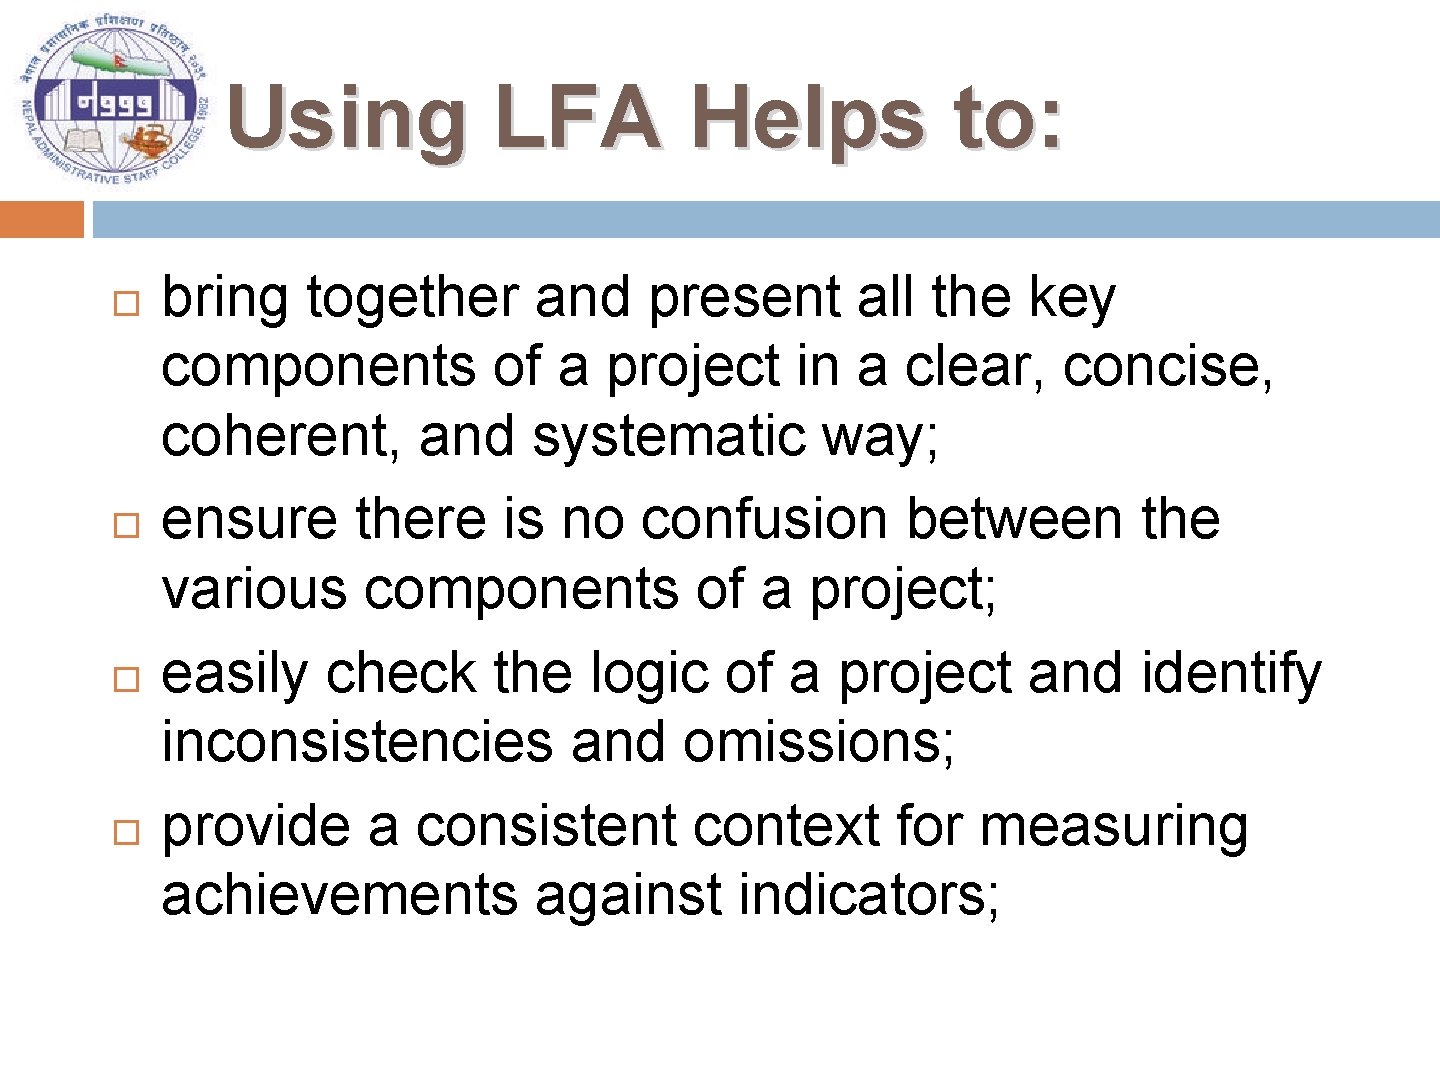 Using LFA Helps to: bring together and present all the key components of a